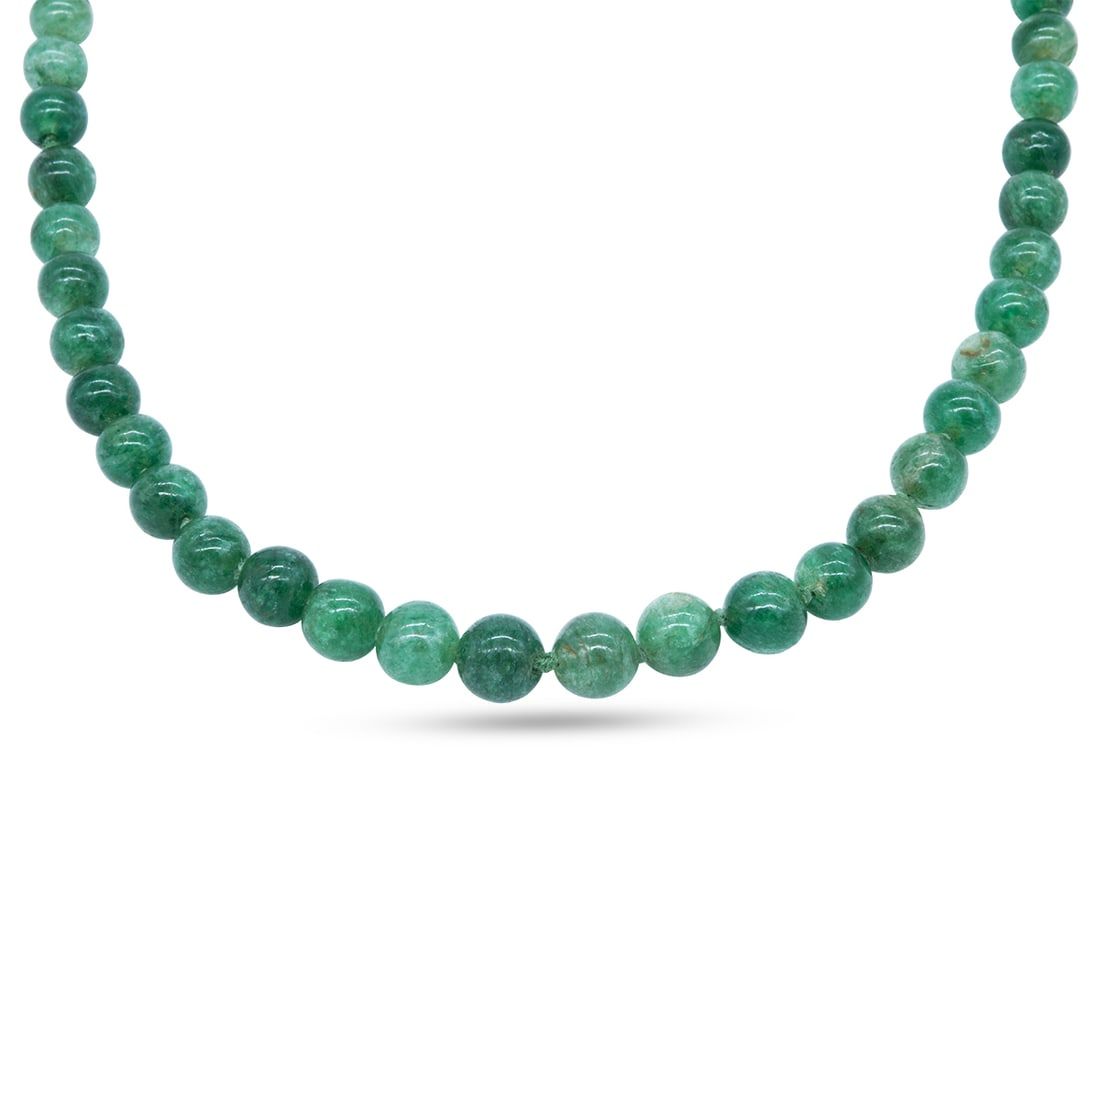 EMERALD BEAD NECKLACE WITH 14K